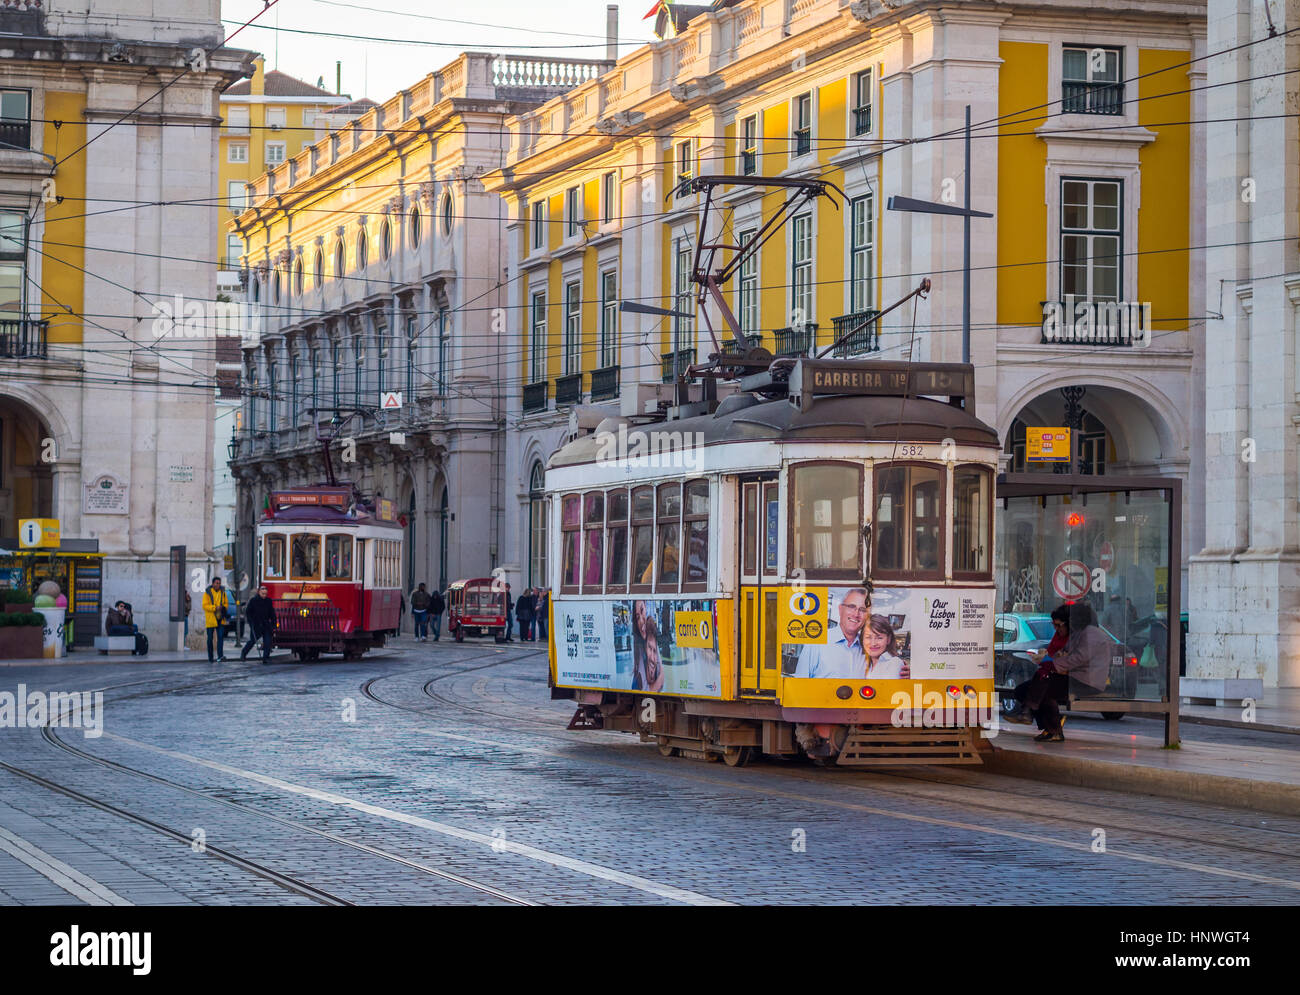 LISBON, PORTUGAL - JANUARY 10, 2017: Old trams on the Praca do Comercio (Commerce Square) in Lisbon, Portugal. Stock Photo